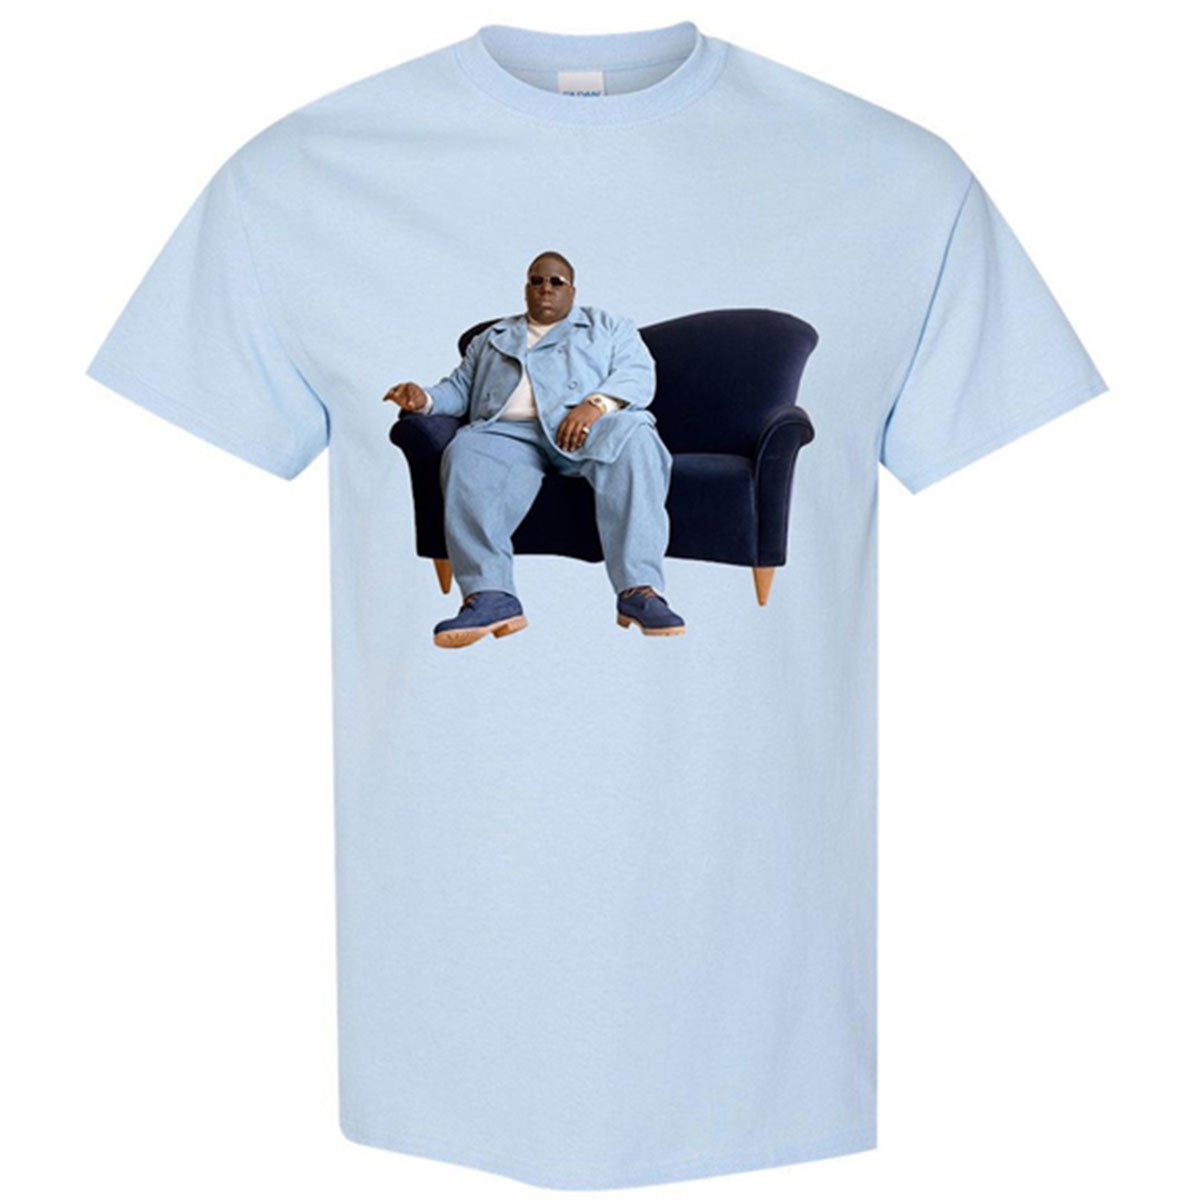 Fedup | HIPHOP WEAR | <img class='new_mark_img1' src='https://img.shop-pro.jp/img/new/icons6.gif' style='border:none;display:inline;margin:0px;padding:0px;width:auto;' />Notorious B.I.G 